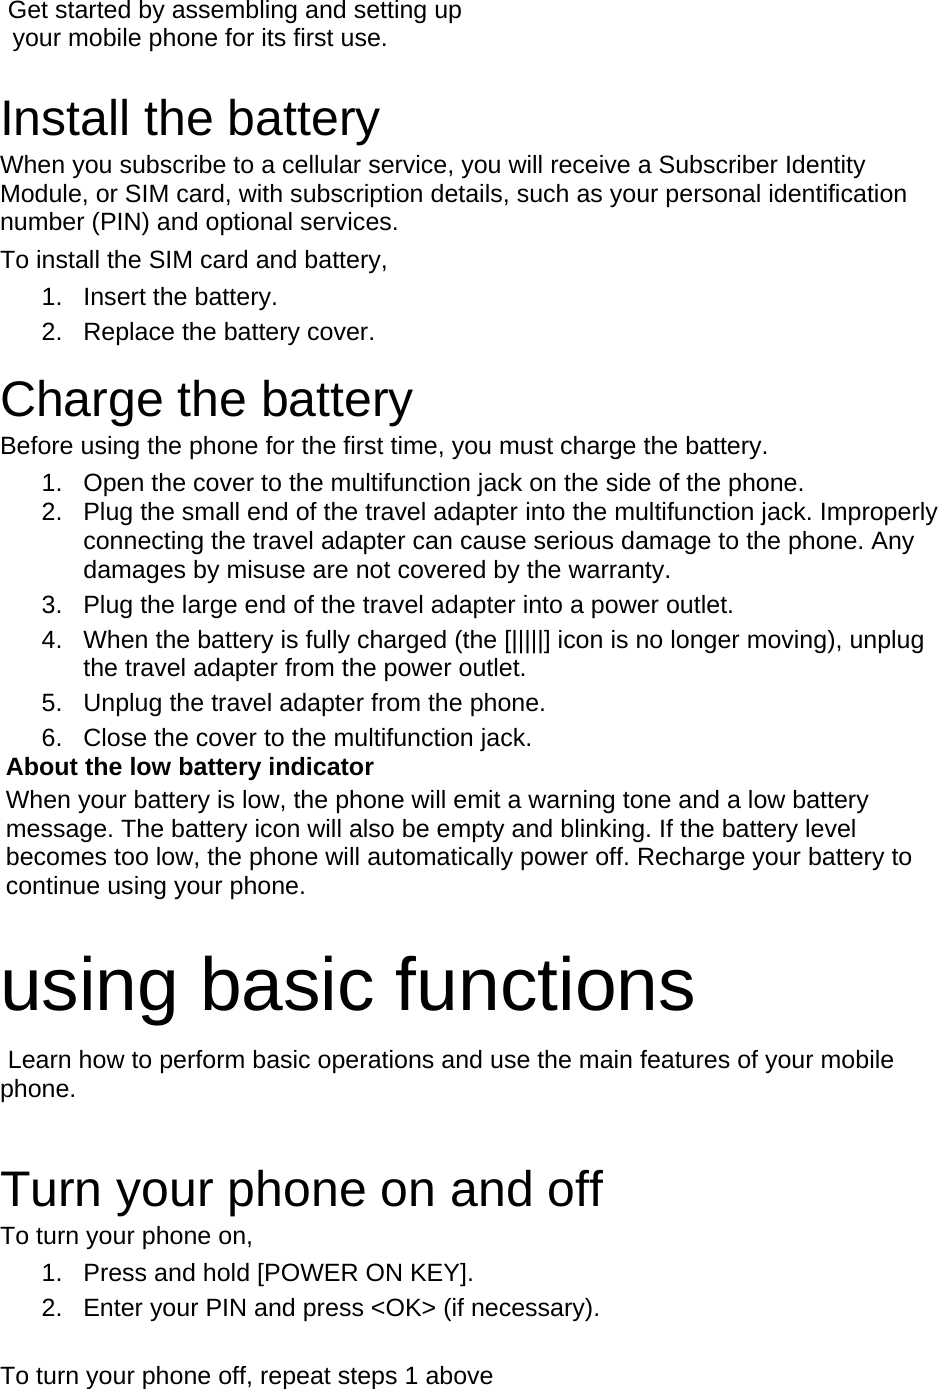  Get started by assembling and setting up     your mobile phone for its first use.  Install the battery When you subscribe to a cellular service, you will receive a Subscriber Identity Module, or SIM card, with subscription details, such as your personal identification number (PIN) and optional services. To install the SIM card and battery, 1. Insert the battery. 2.  Replace the battery cover.  Charge the battery Before using the phone for the first time, you must charge the battery. 1.  Open the cover to the multifunction jack on the side of the phone. 2.  Plug the small end of the travel adapter into the multifunction jack. Improperly connecting the travel adapter can cause serious damage to the phone. Any damages by misuse are not covered by the warranty. 3.  Plug the large end of the travel adapter into a power outlet. 4.  When the battery is fully charged (the [|||||] icon is no longer moving), unplug the travel adapter from the power outlet. 5.  Unplug the travel adapter from the phone. 6.  Close the cover to the multifunction jack. About the low battery indicator When your battery is low, the phone will emit a warning tone and a low battery message. The battery icon will also be empty and blinking. If the battery level becomes too low, the phone will automatically power off. Recharge your battery to continue using your phone.  using basic functions  Learn how to perform basic operations and use the main features of your mobile phone.   Turn your phone on and off To turn your phone on, 1.  Press and hold [POWER ON KEY]. 2.  Enter your PIN and press &lt;OK&gt; (if necessary).  To turn your phone off, repeat steps 1 above 